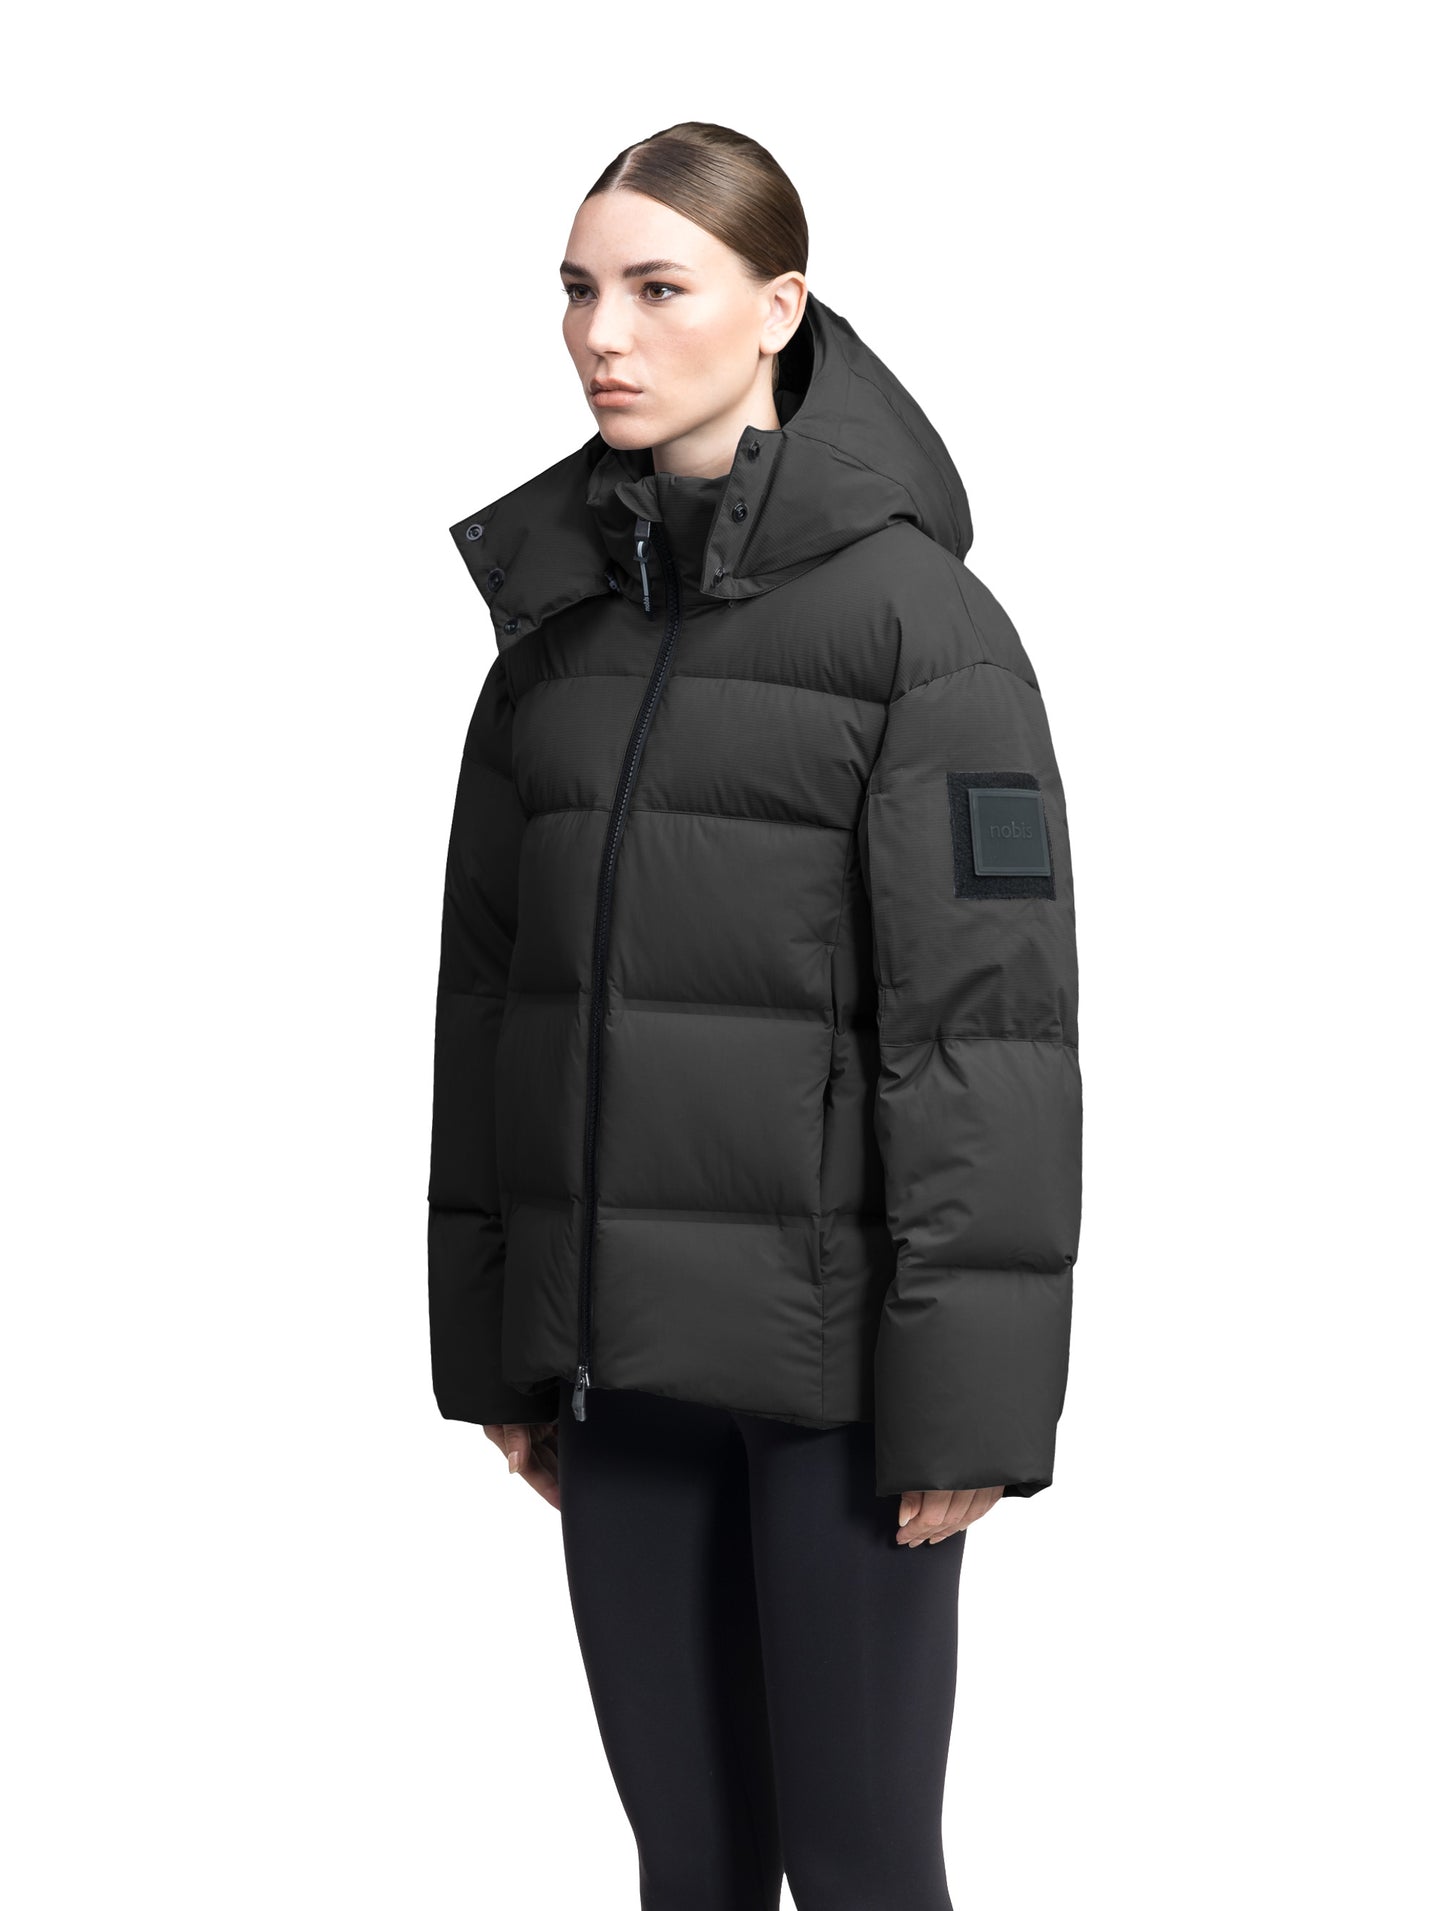 Una Ladies Performance Puffer in hip length, Technical Taffeta and Durable Stretch Ripstop fabrication, Premium Canadian White Duck Down insulation, removable down filled hood, centre front two-way zipper, and side-entry pockets at waist, in Black